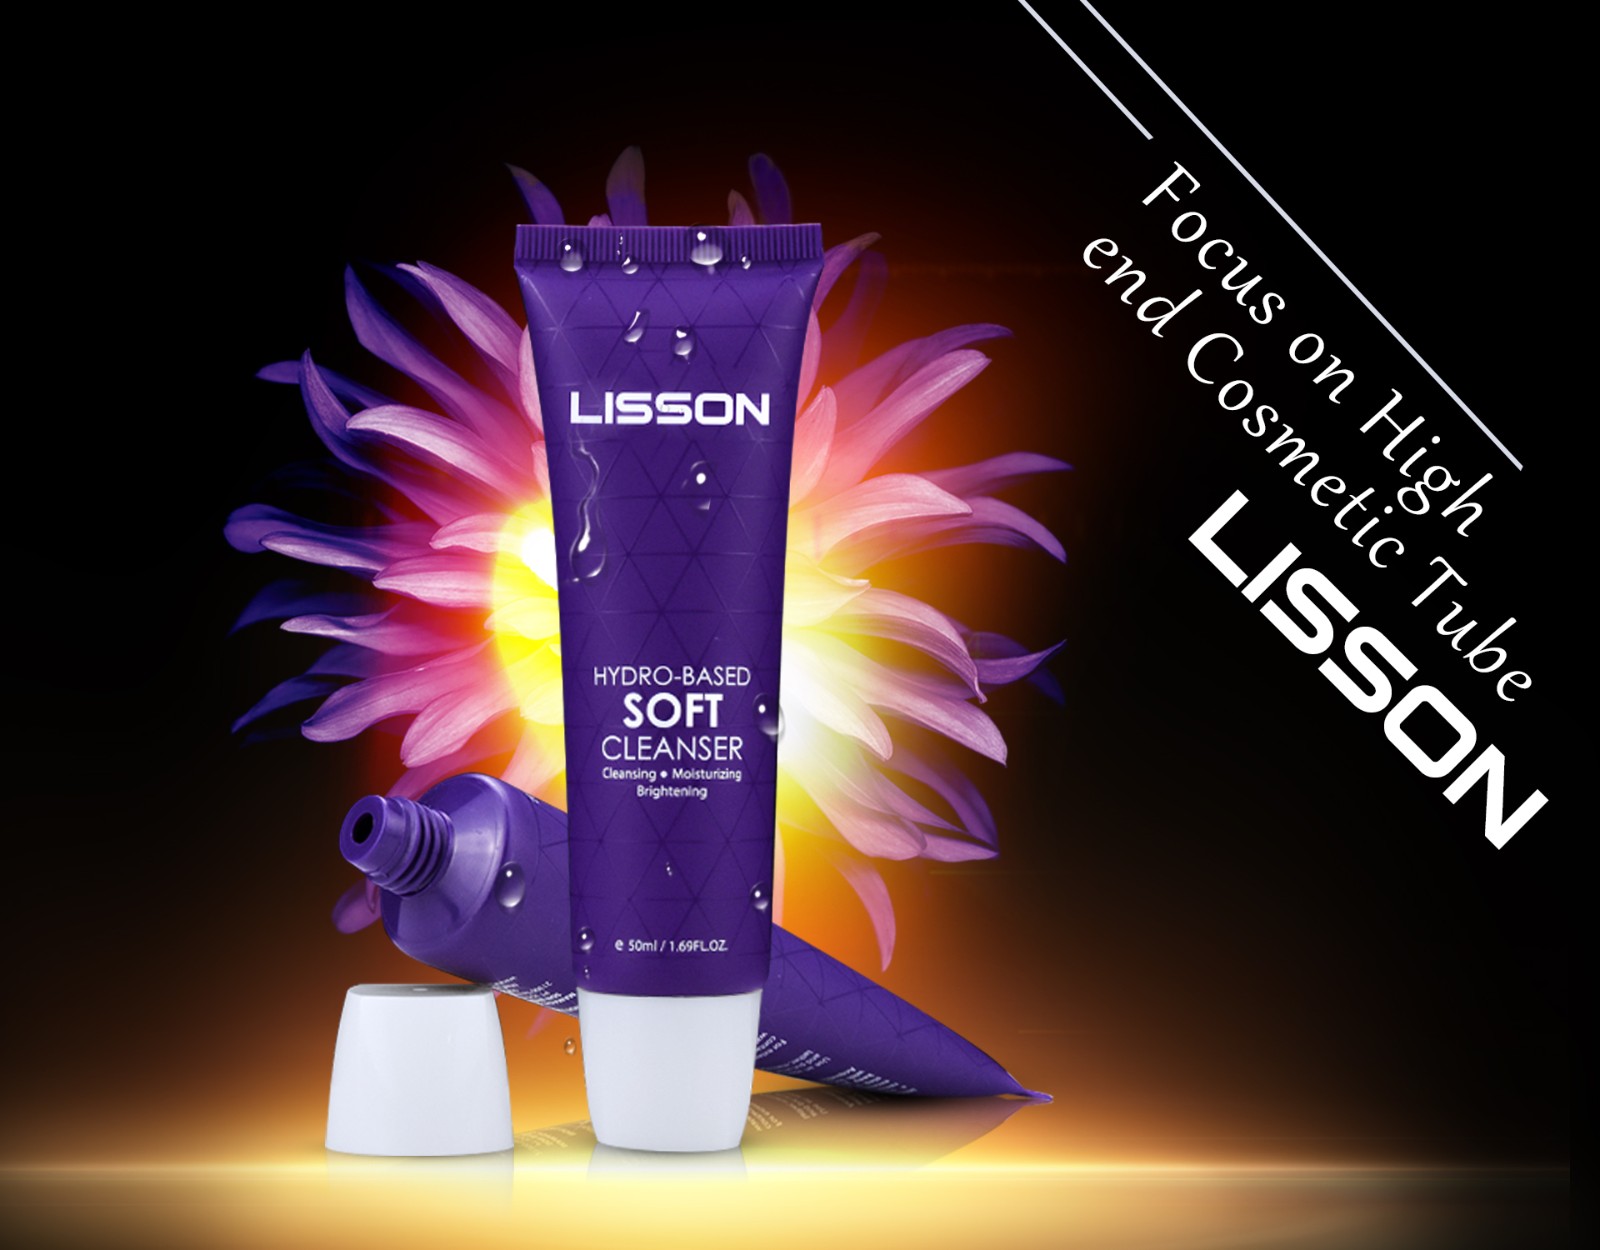 Lisson flat soap tube hot-sale for lotion